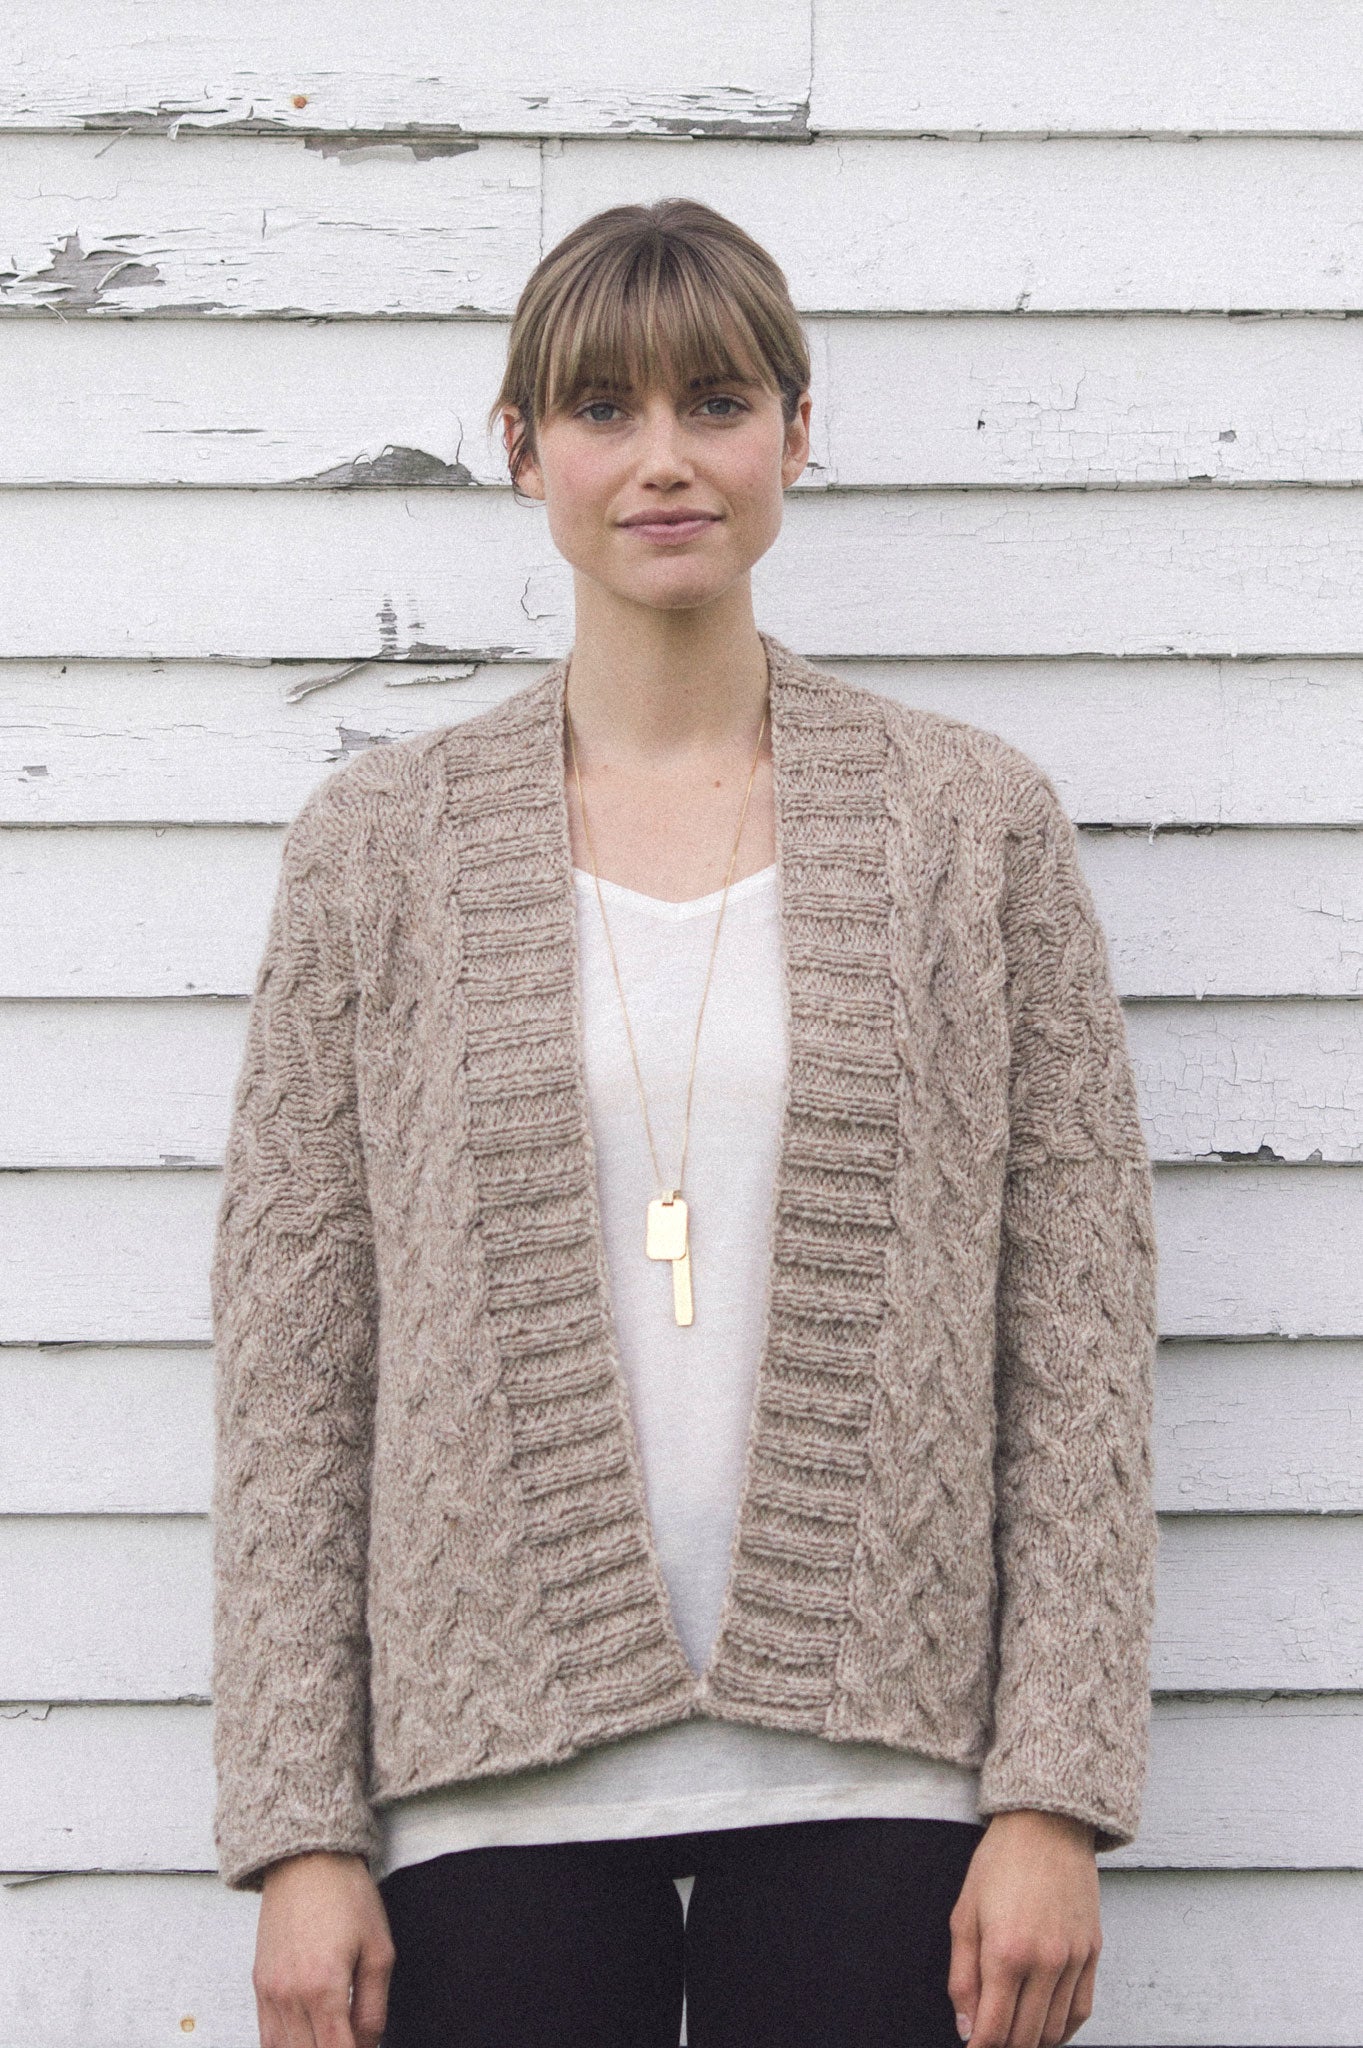 Chestnut Cardi Knitting Pattern by Pam Allen – Quince & Co.